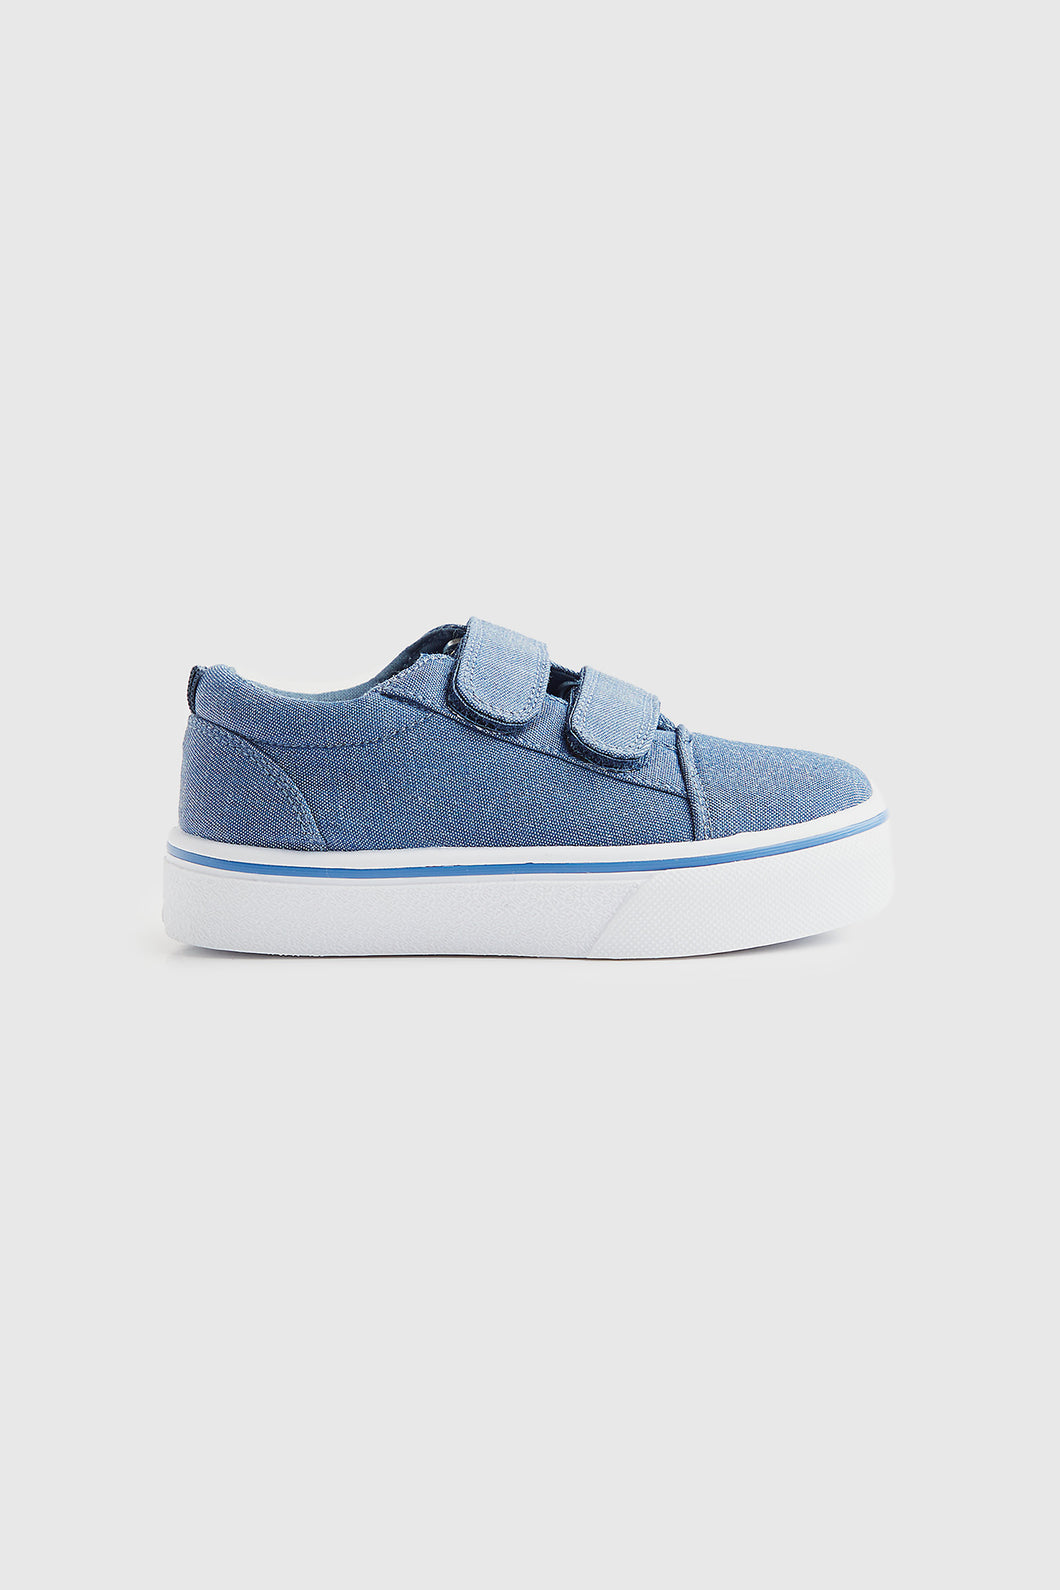 Mothercare Chambray Canvas Shoes